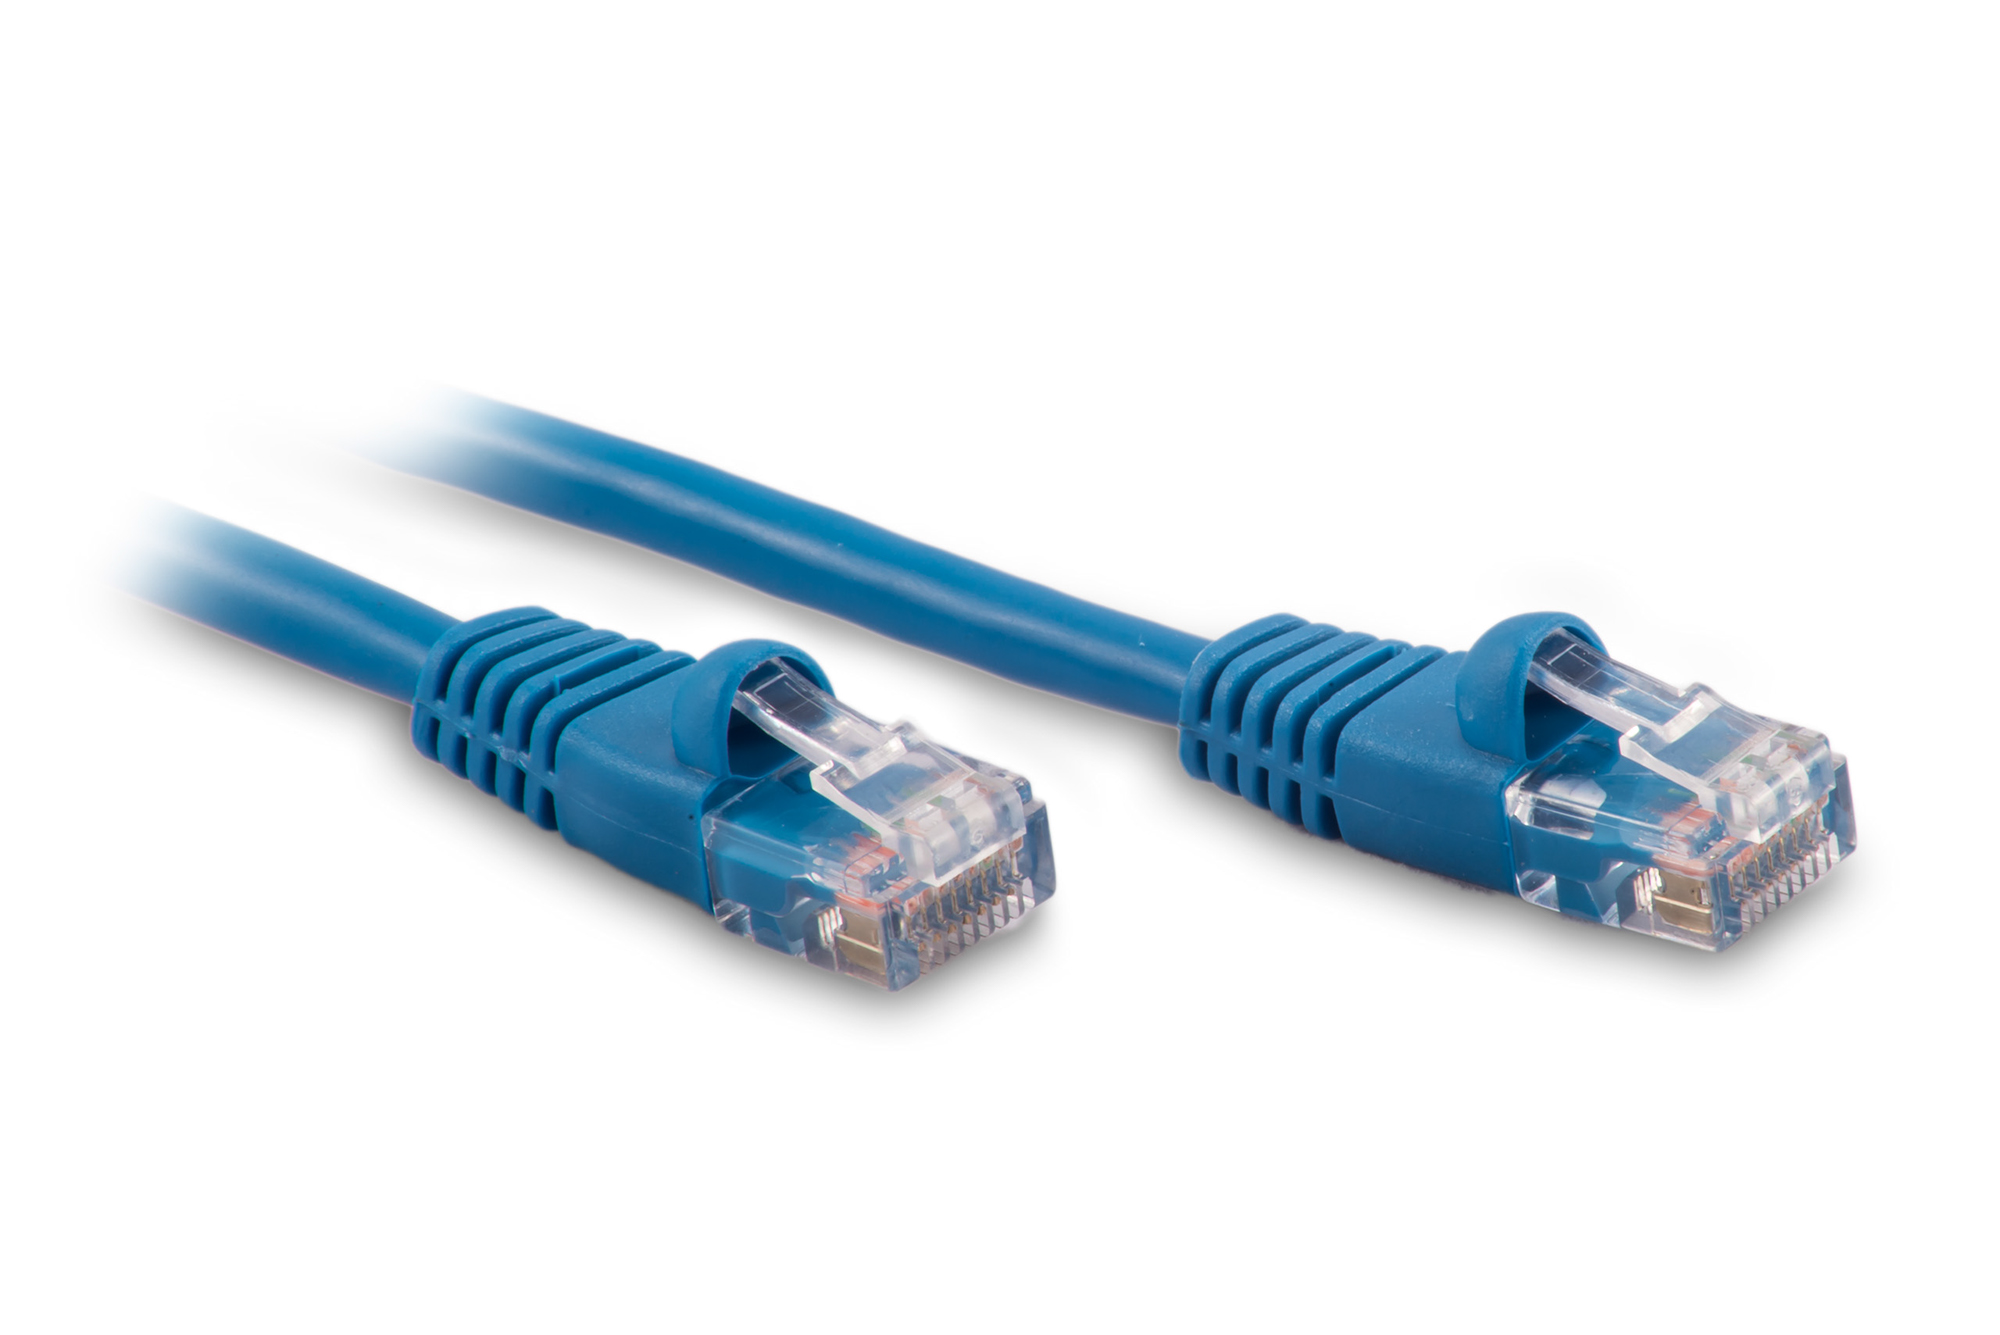 25ft Cat6 Ethernet Patch Cable - Blue Color - Snagless Boot, Stranded, RJ45, 550Mhz, 24AWG